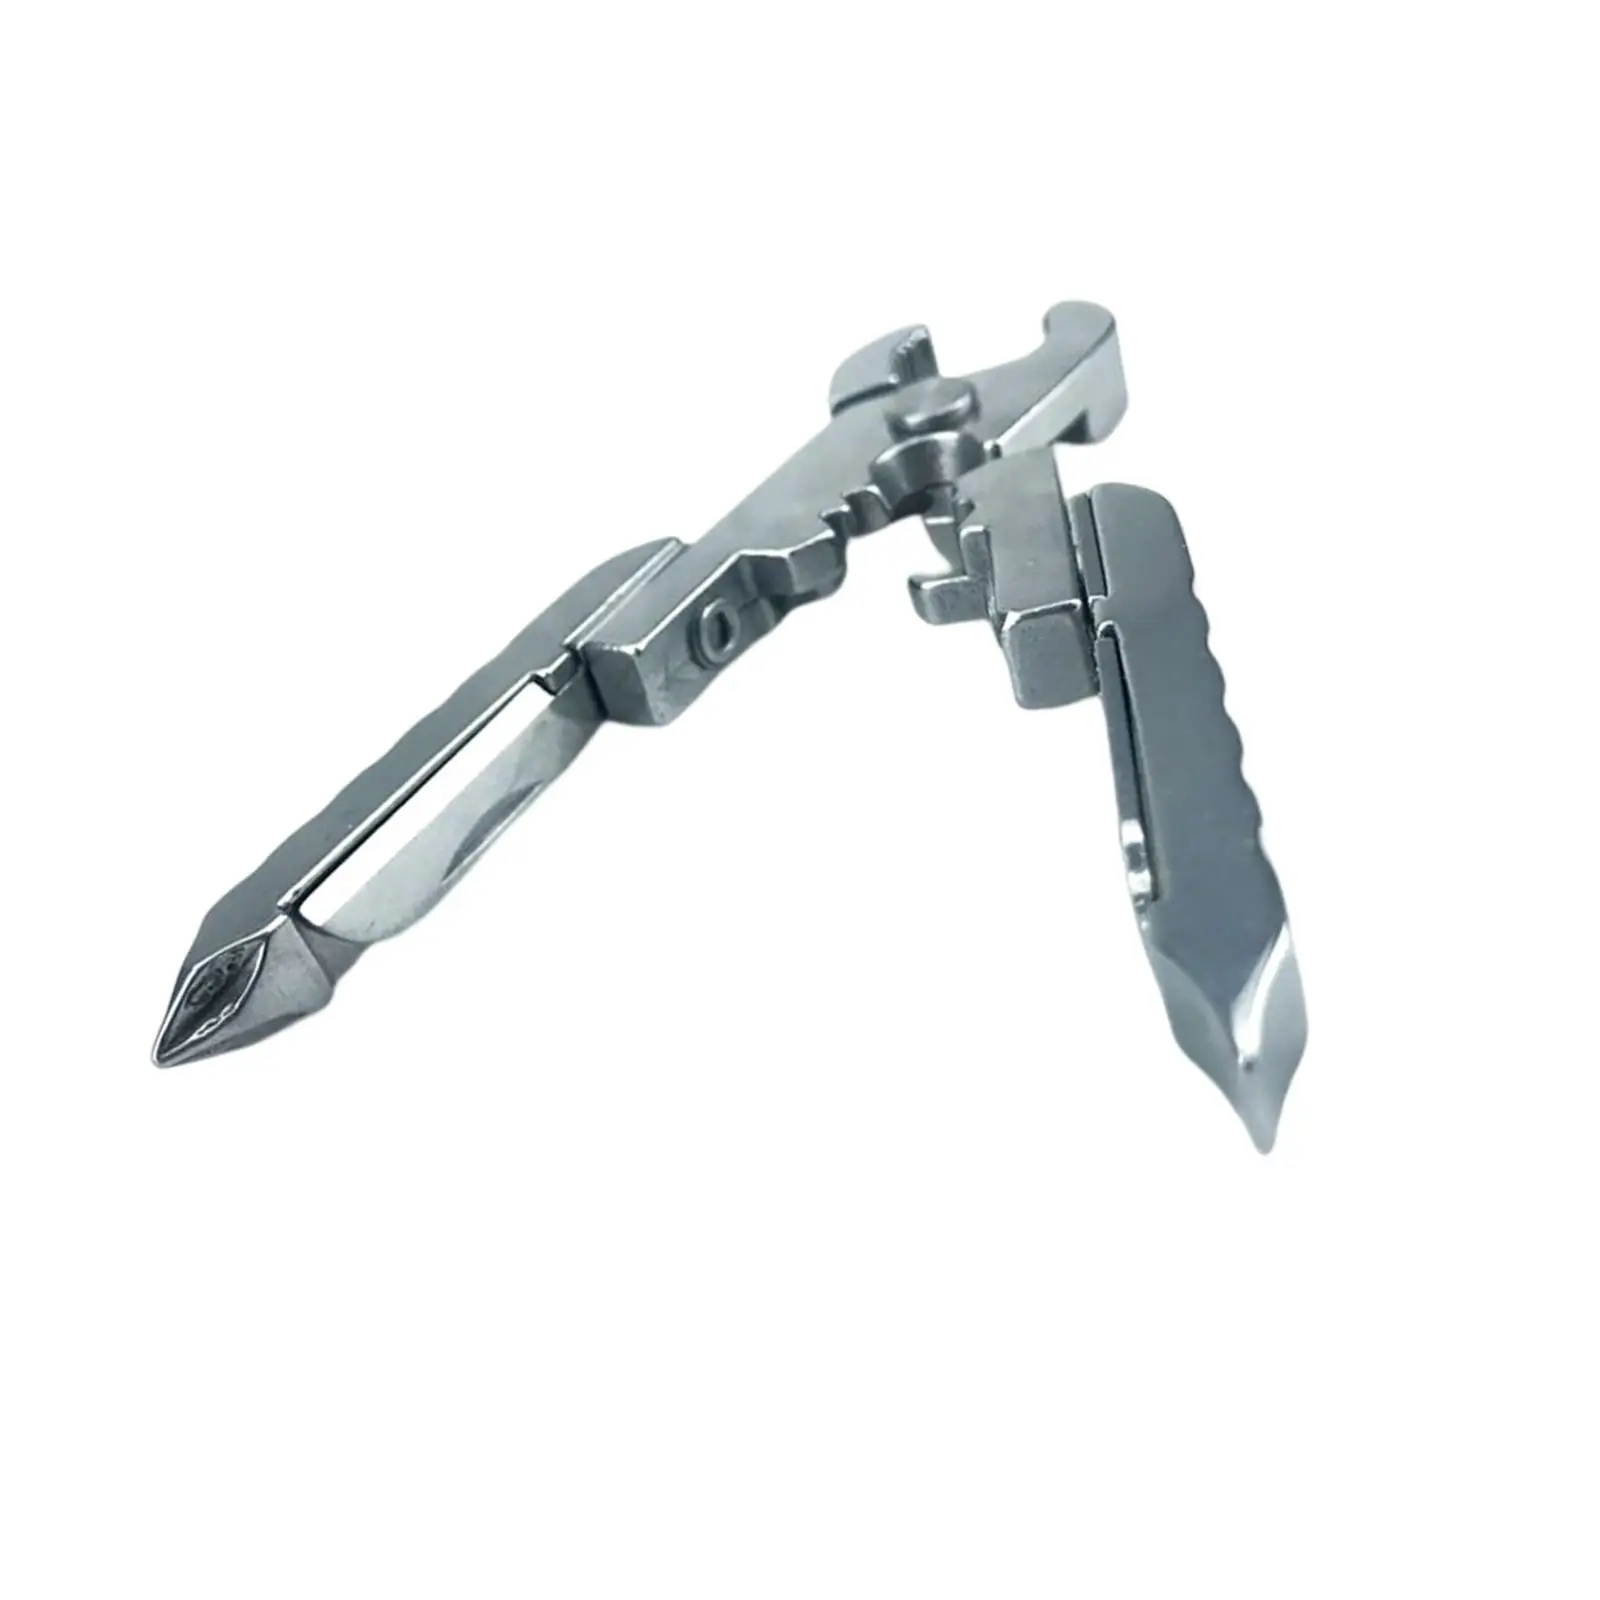 Outdoor Multipurpose Pliers Multi Tools Portable Wire Stripper Stainless Steel Small Pliers for Fishing Outdoor Activities